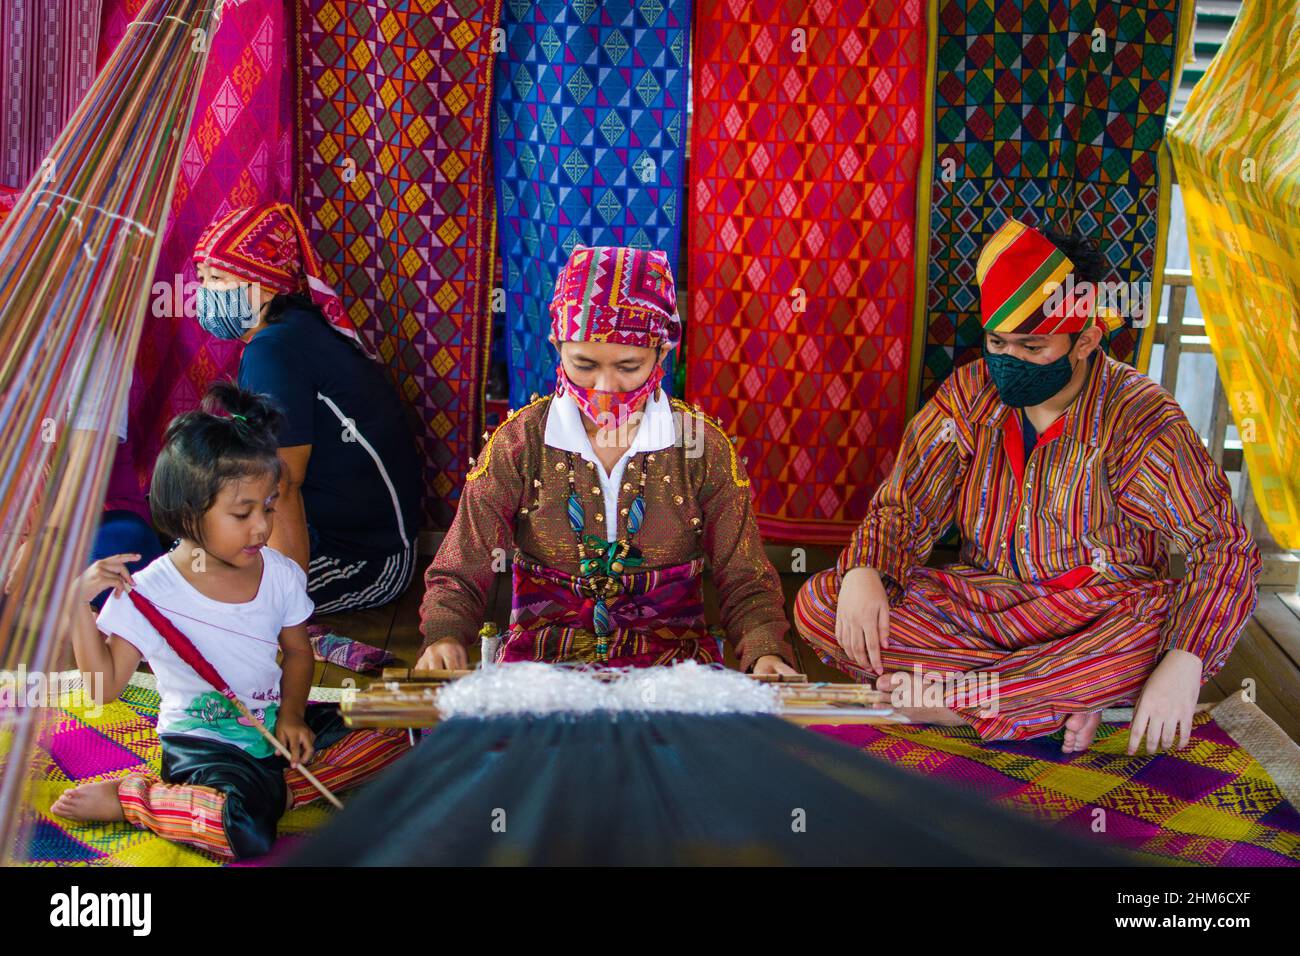 The Yakan people are among the major indigenous Filipino ethnolinguistic groups in the Sulu Archipelago. Stock Photo